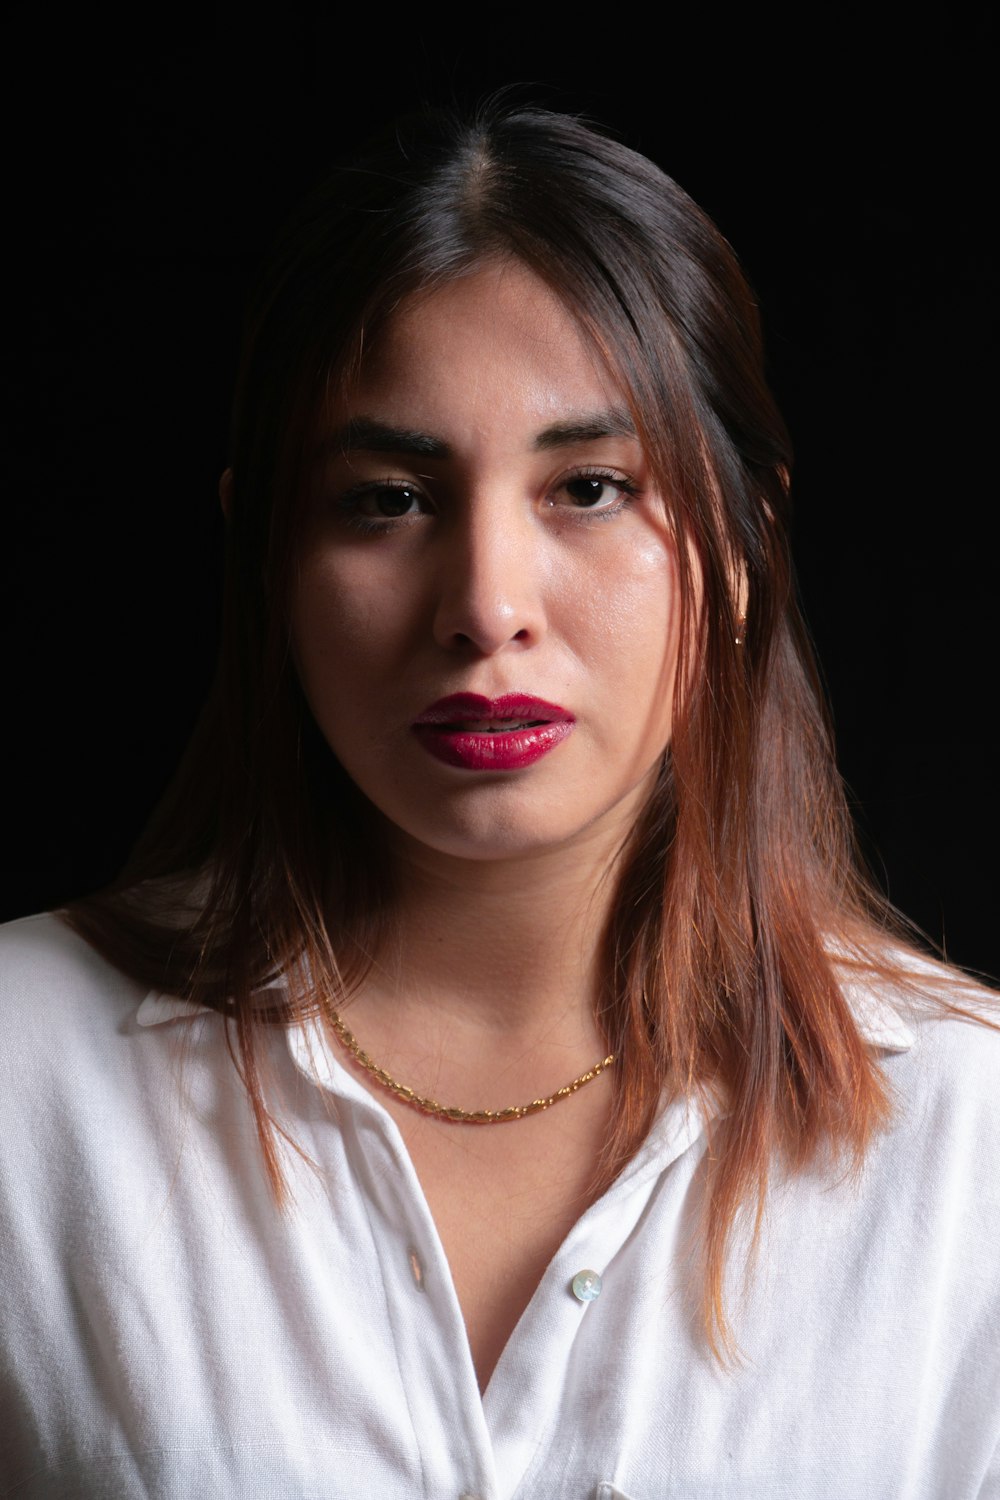 a woman wearing a white shirt and a necklace